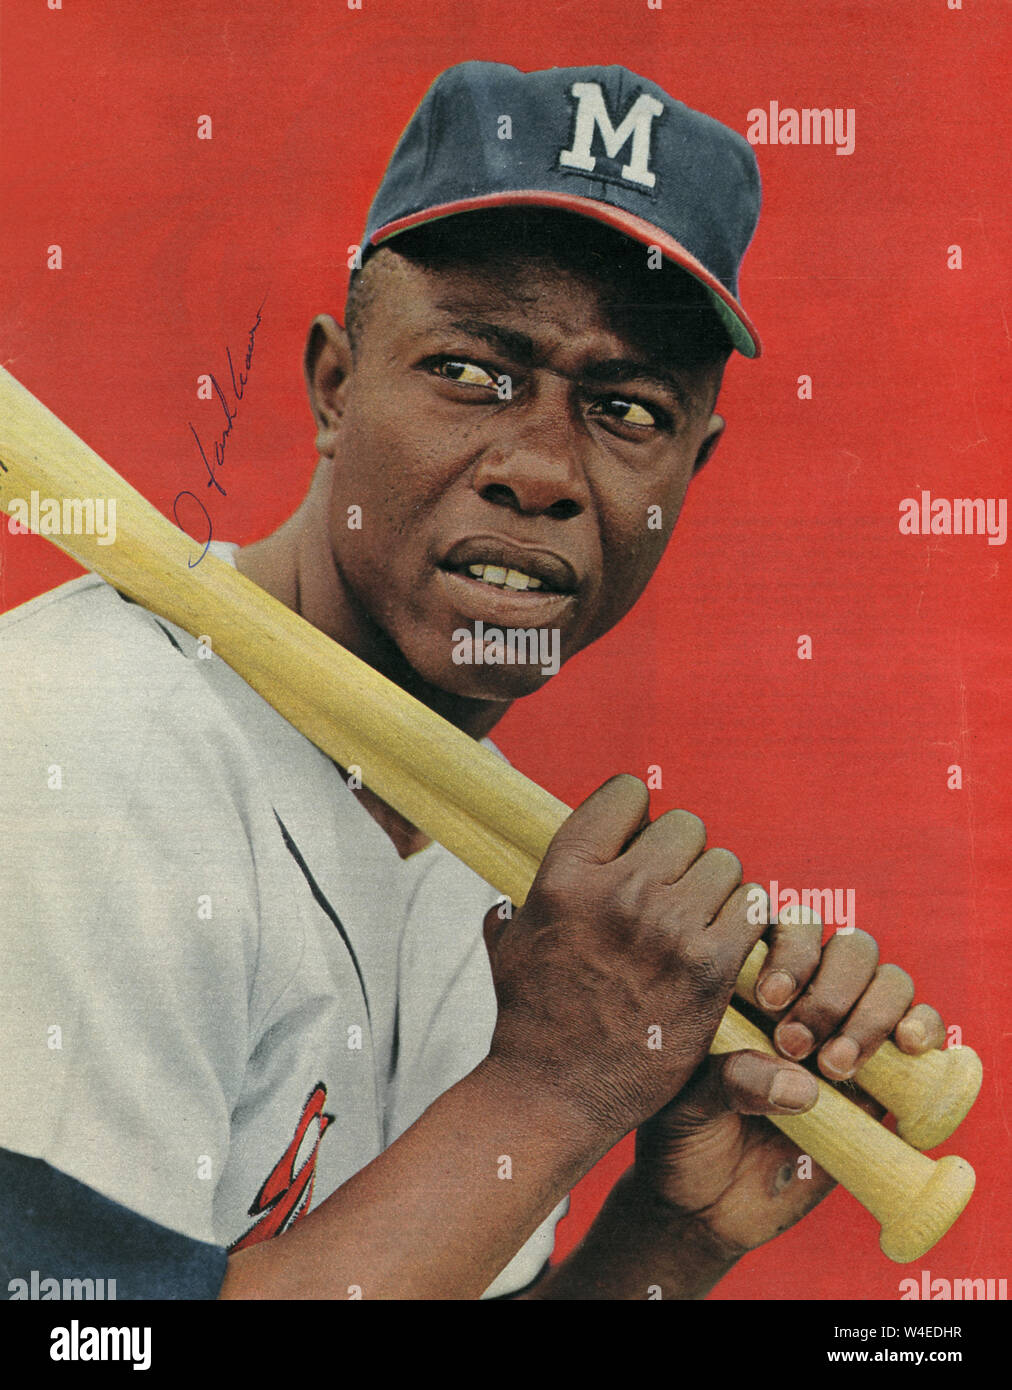 Hall of Fame baseball player Hank Aaron with the Milwaukee Braves in the 1950s and 1960s. Stock Photo